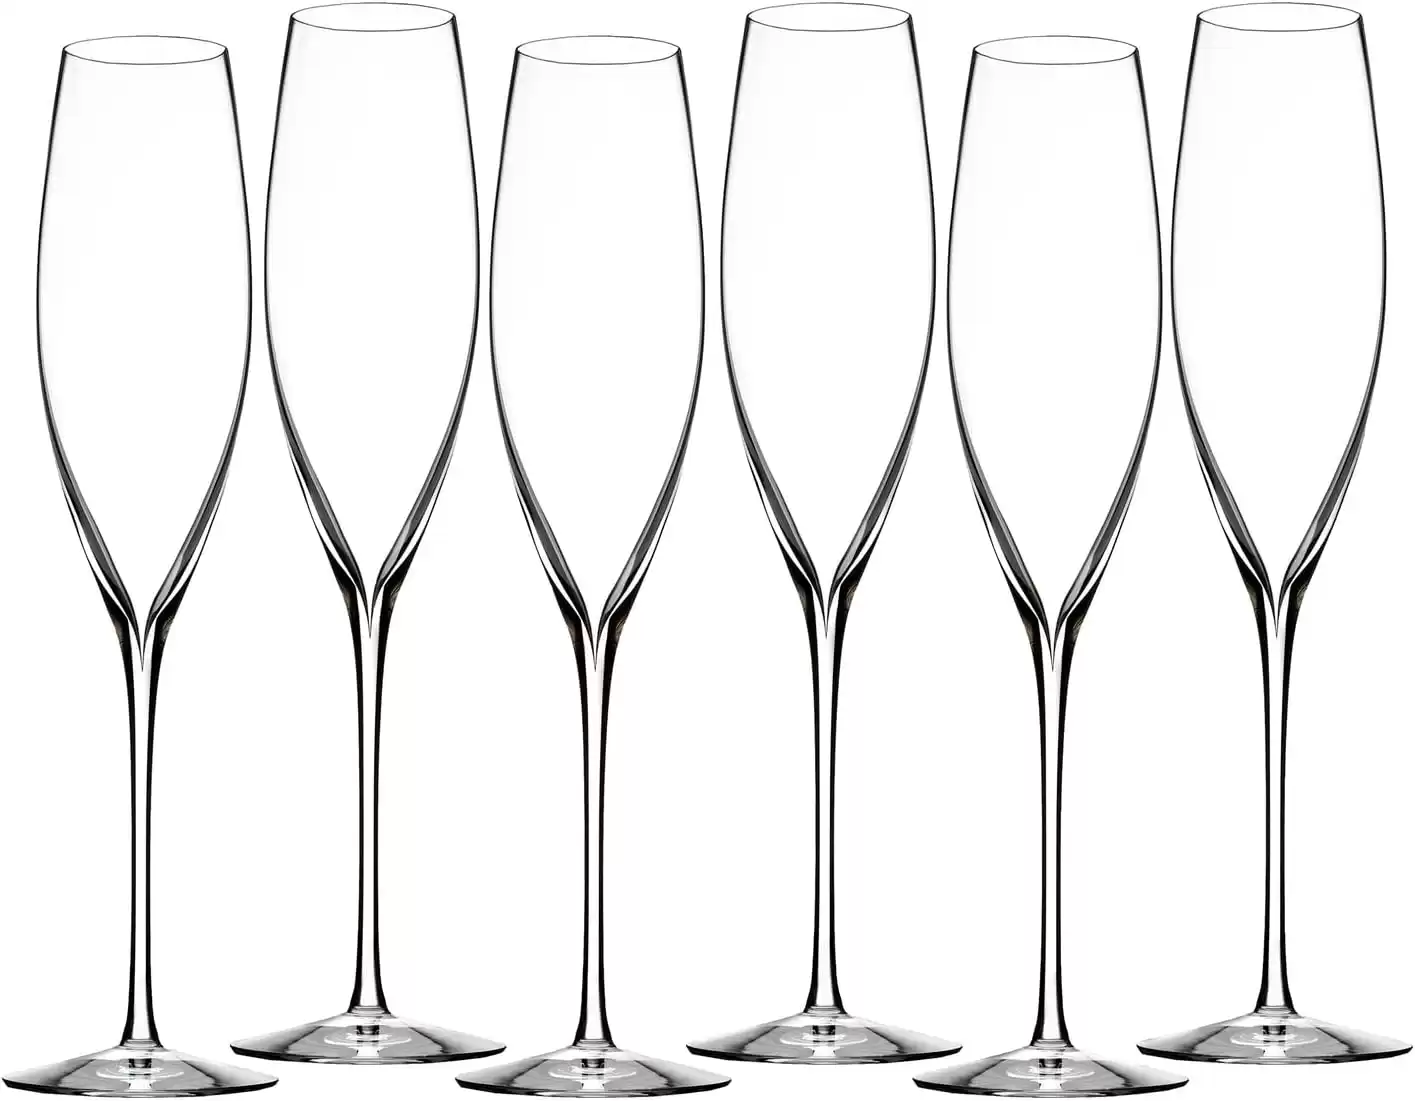 Waterford Elegance Classic Champagne Toasting Flute, Set of 6